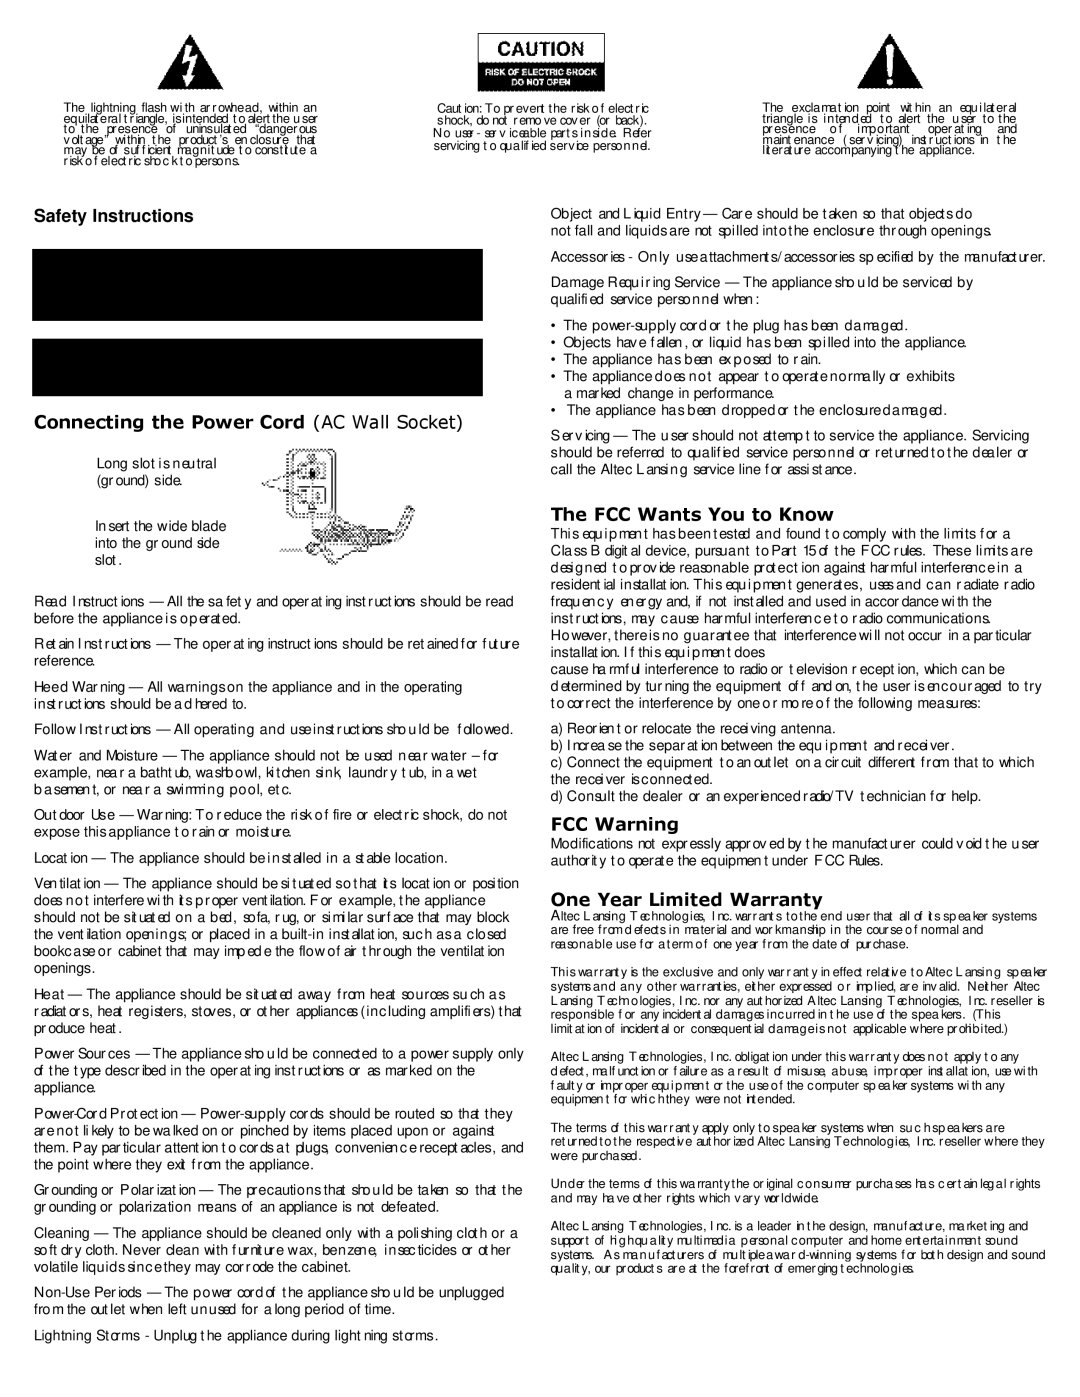 Altec Lansing 4100 Safety Instructions, Connecting the Power Cord AC Wall Socket, The FCC Wants You to Know, FCC Warning 